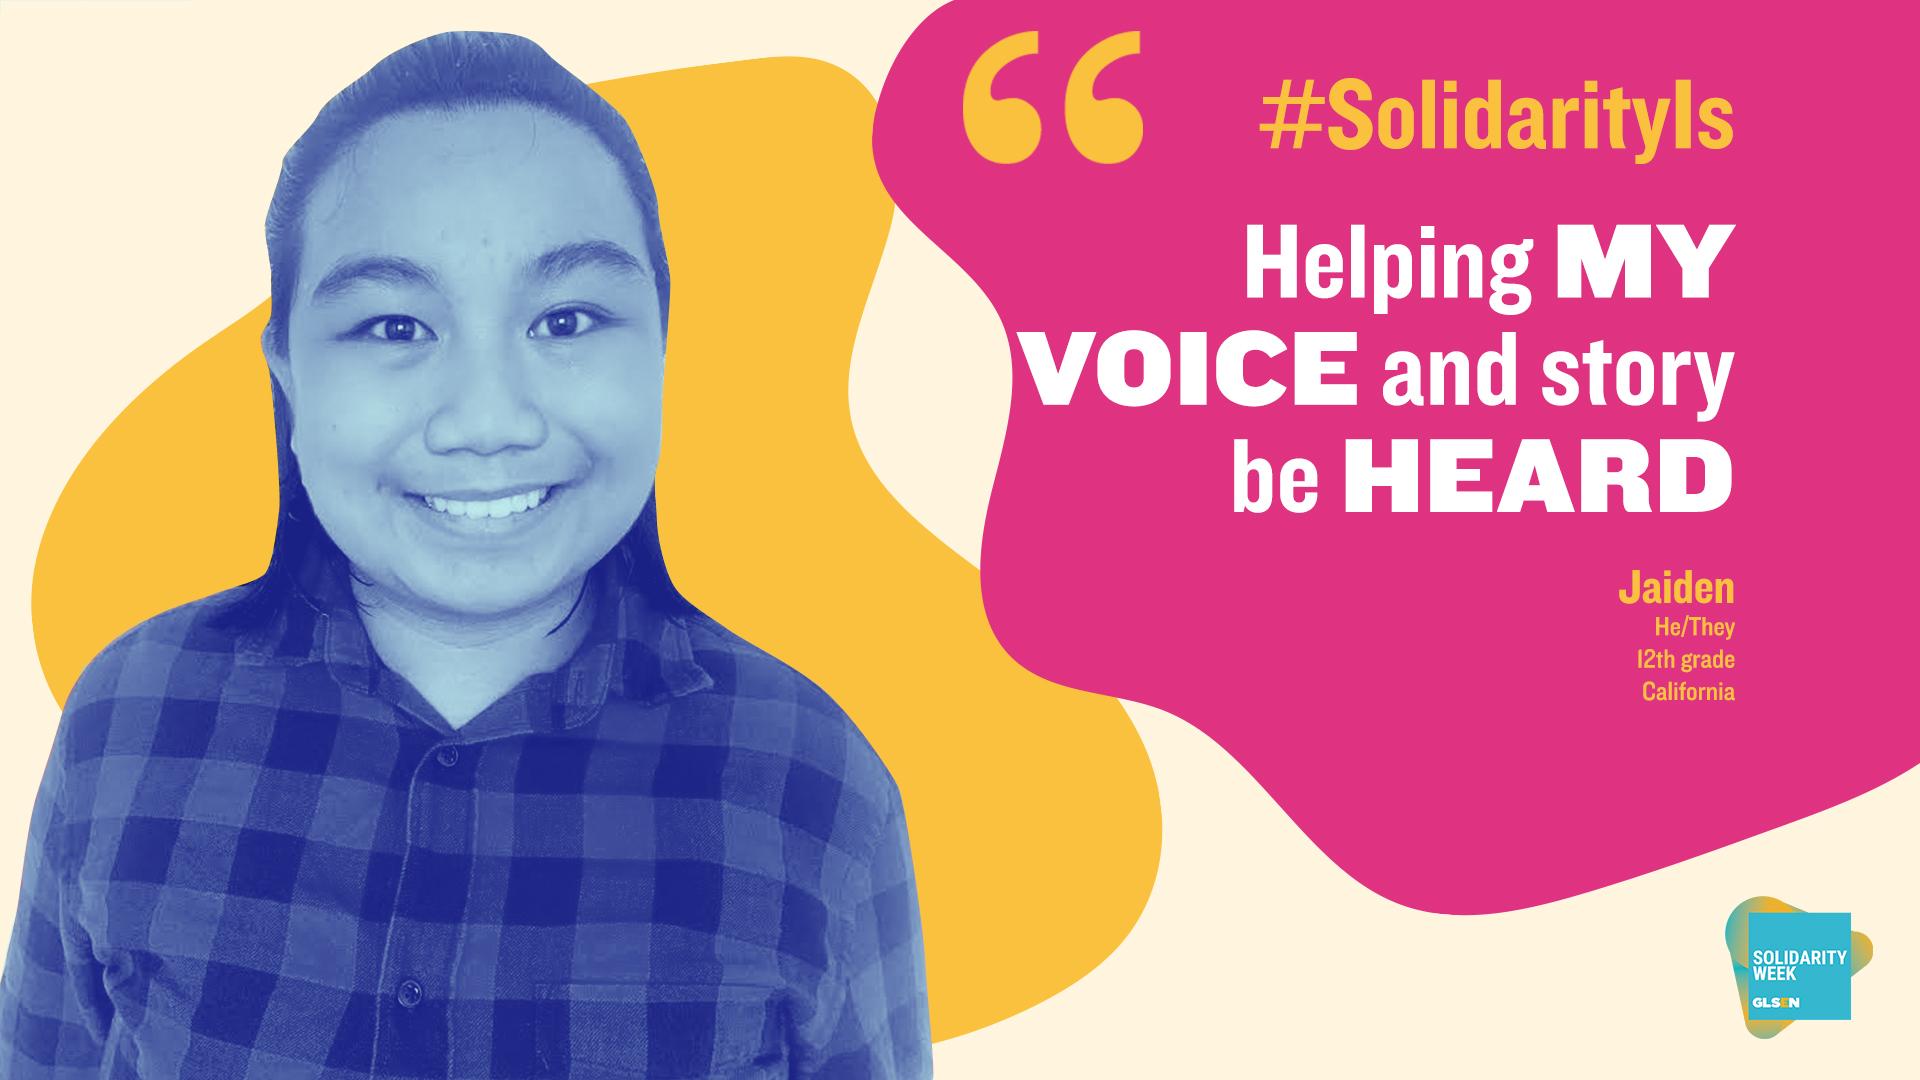 poster featuring a non-binary person along with a quote 'solidarity is helping my voice and story be heard'